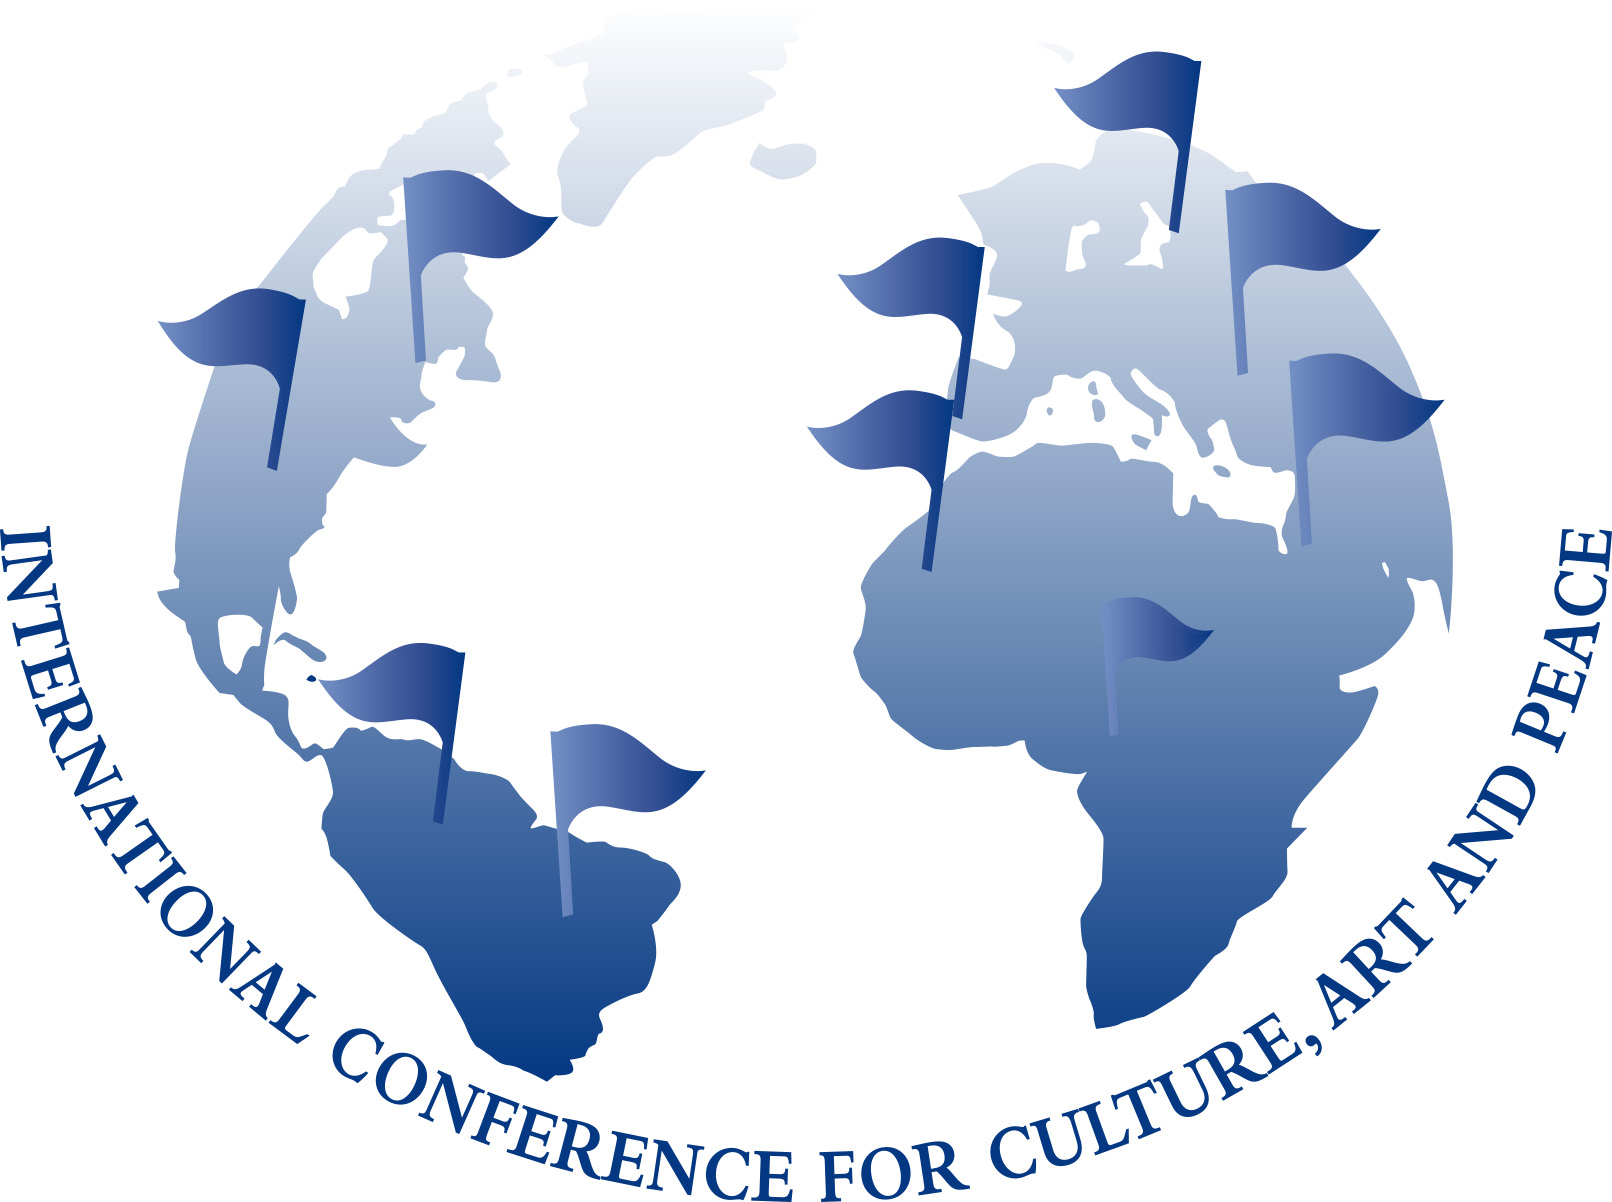 INTERNATIONAL CONFERENCE FOR CULTURE ART AND PEACE